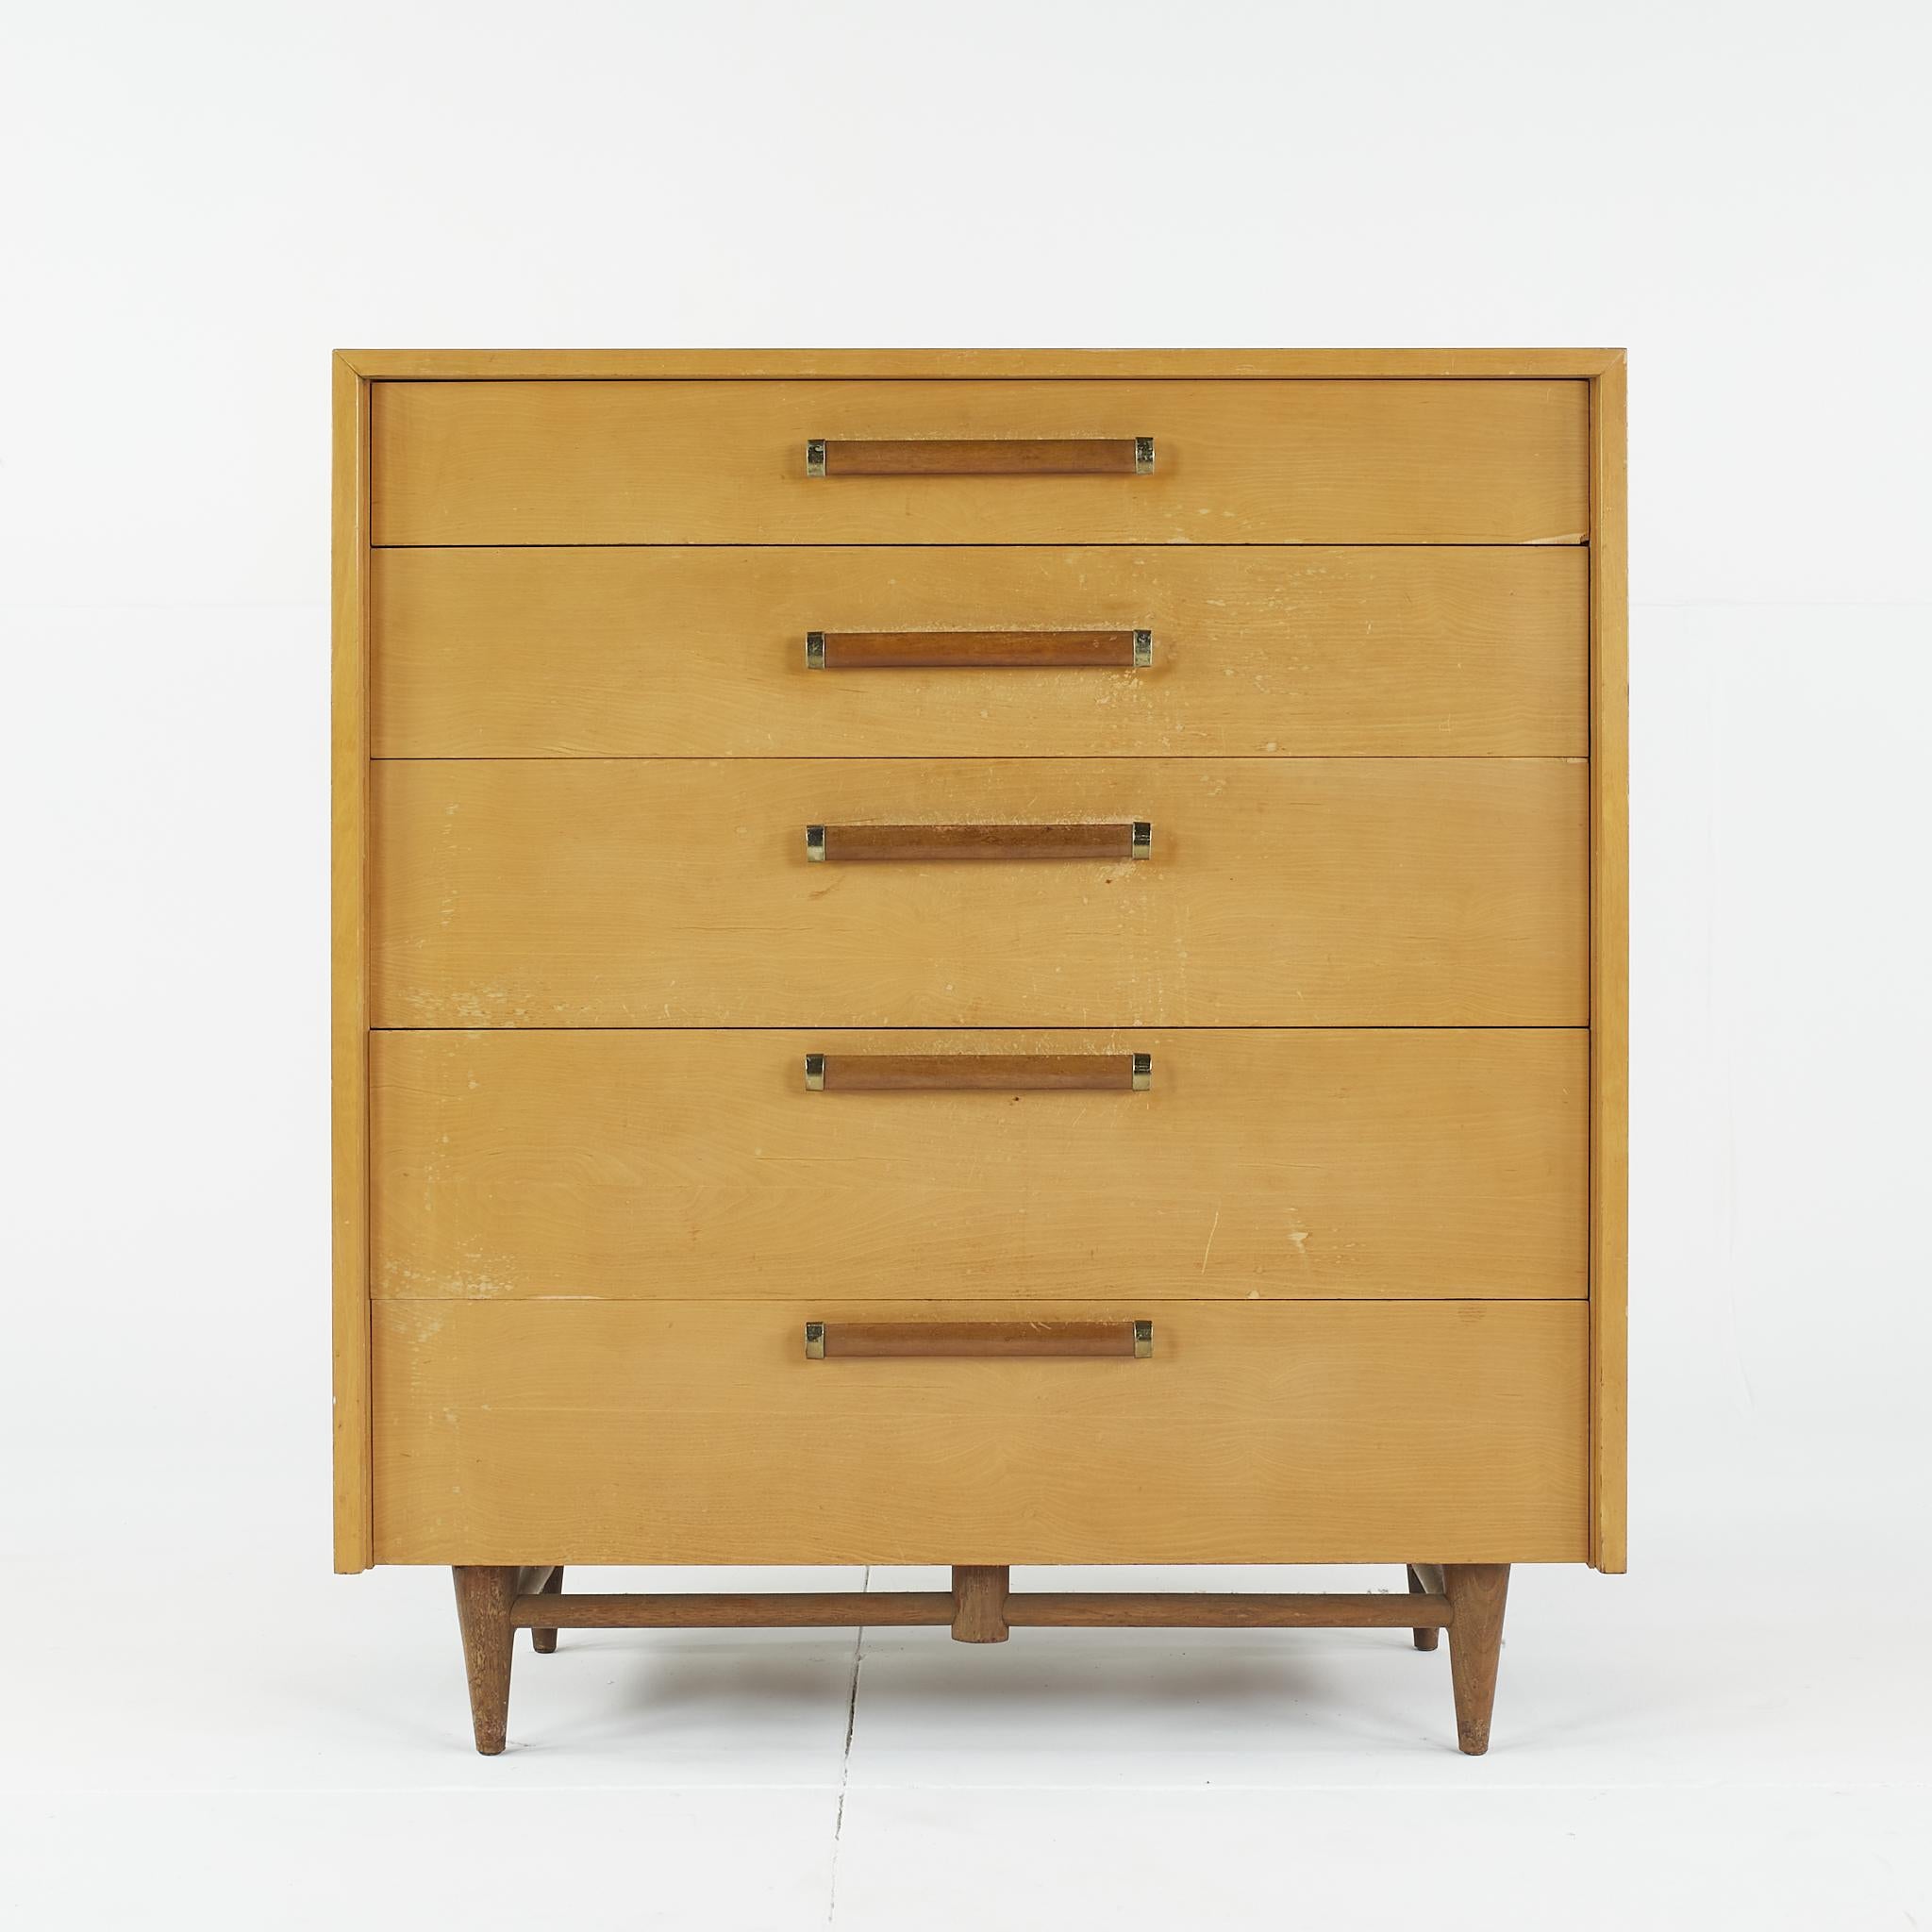 Merton Gershun for American of Martinsville Mid Century Urban Suburban 5-Drawer Highboy Dresser

This dresser measures: 38 wide x 19 deep x 42 inches high

All pieces of furniture can be had in what we call restored vintage condition. That means